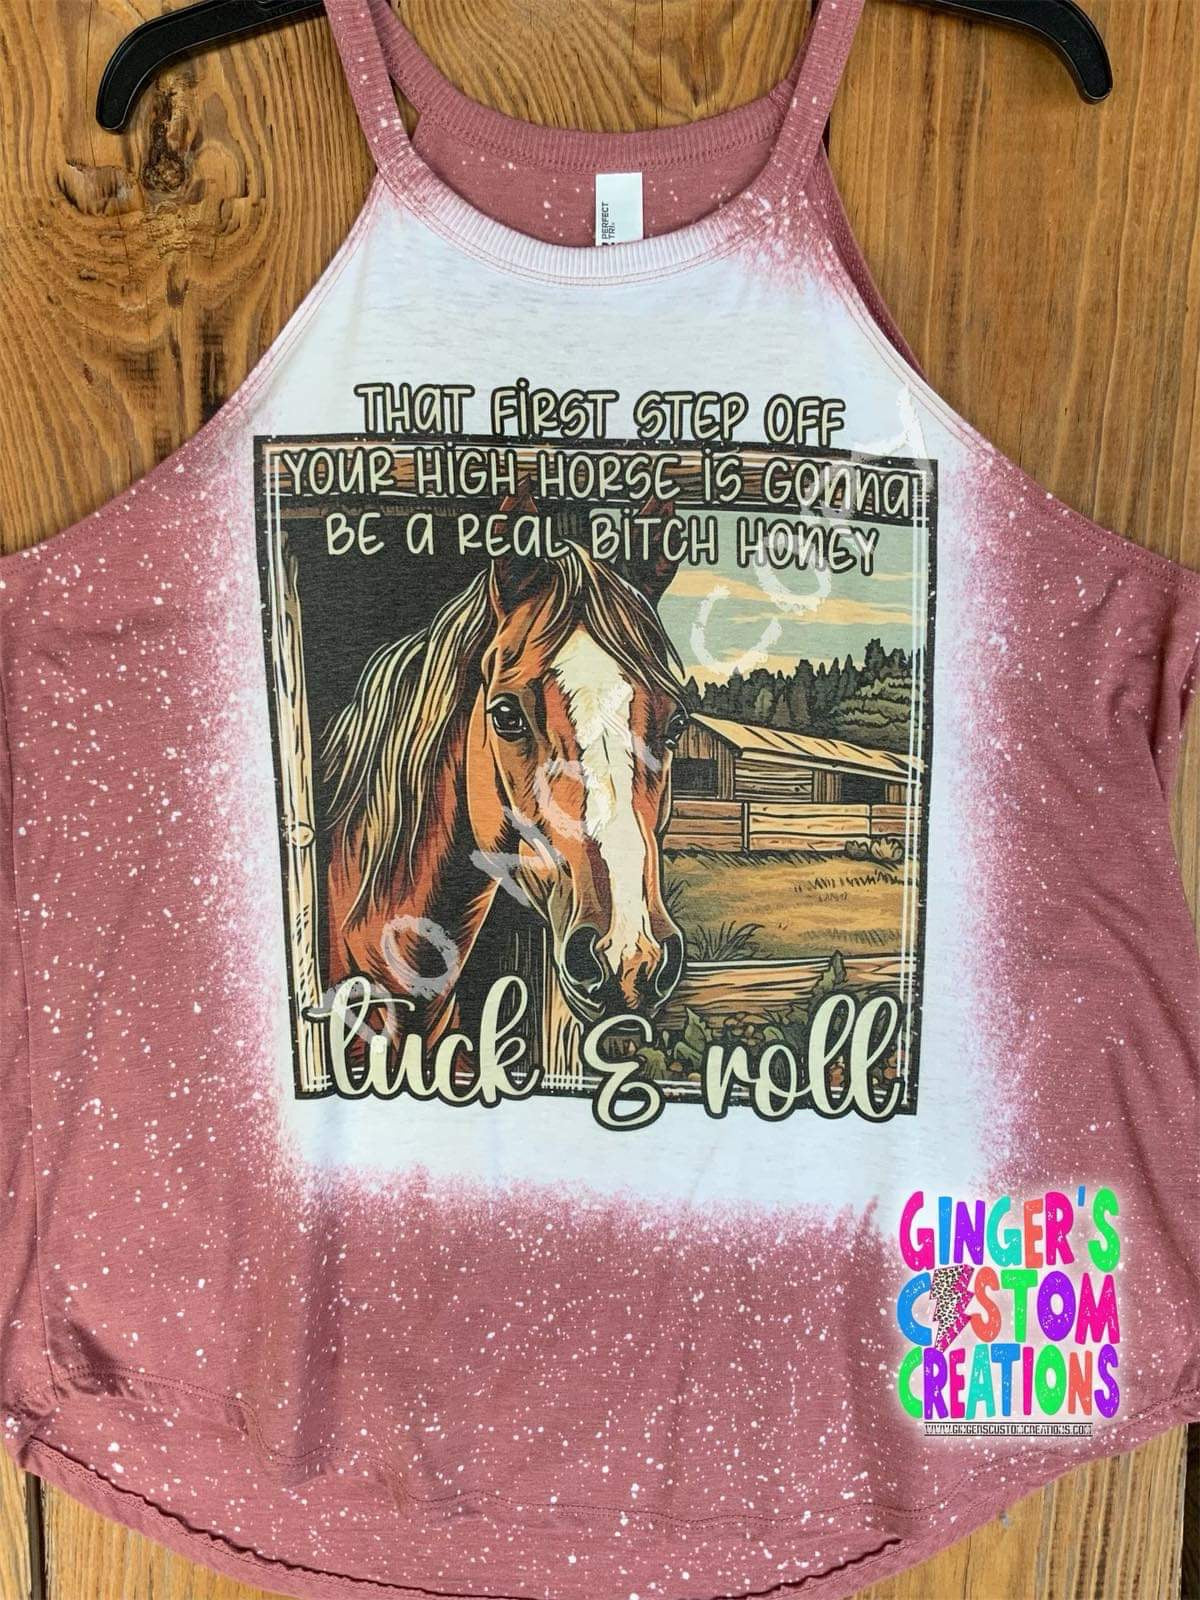 THE FIRST STEP OFF YOUR HIGH HORSE - PINK ROCKER TANK TOP